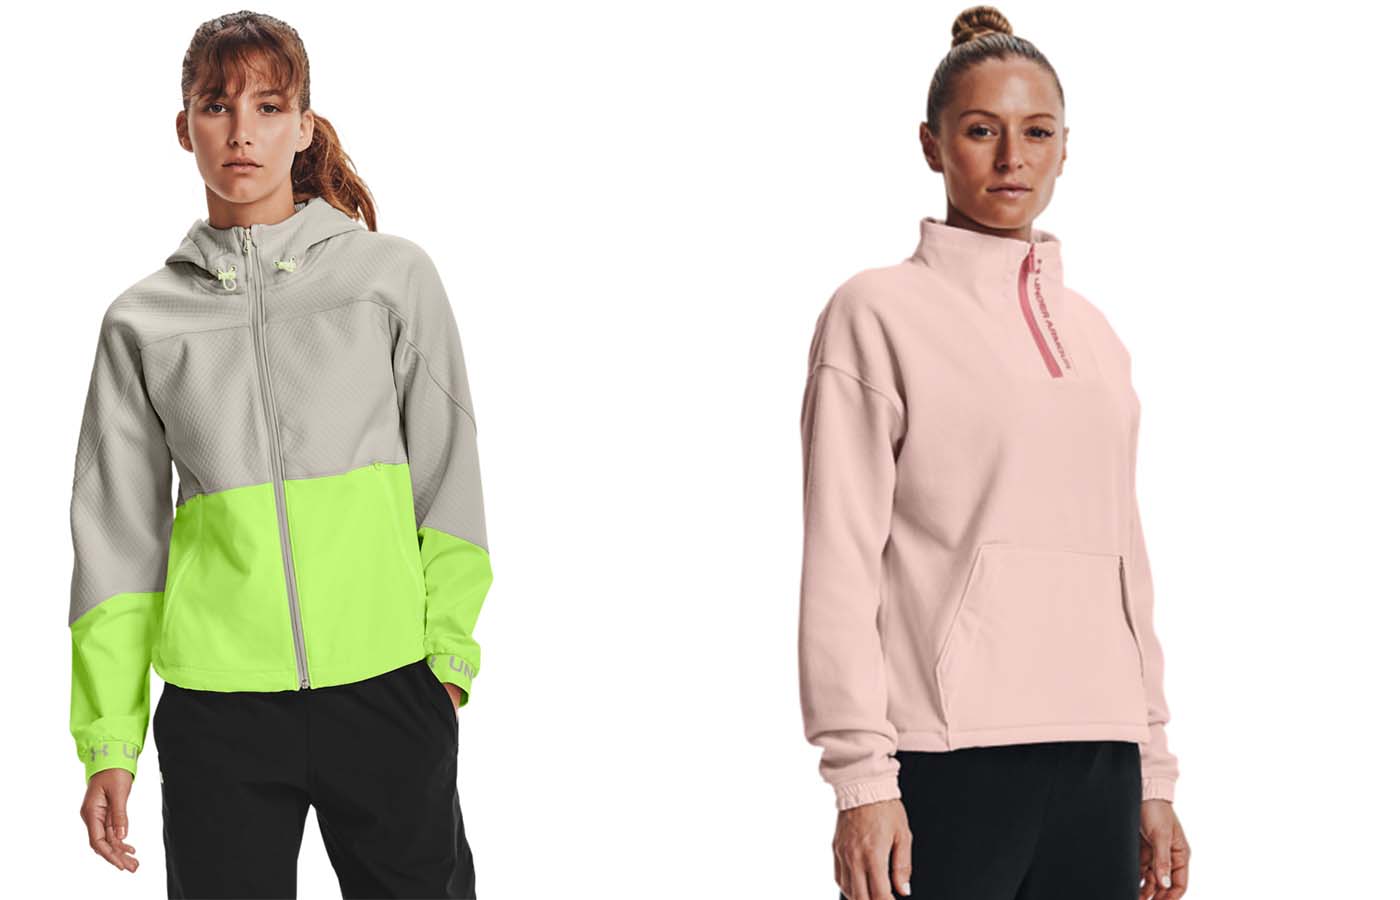 Under Armour’s Womens ColdGear Will Sleigh Your Winter Workout